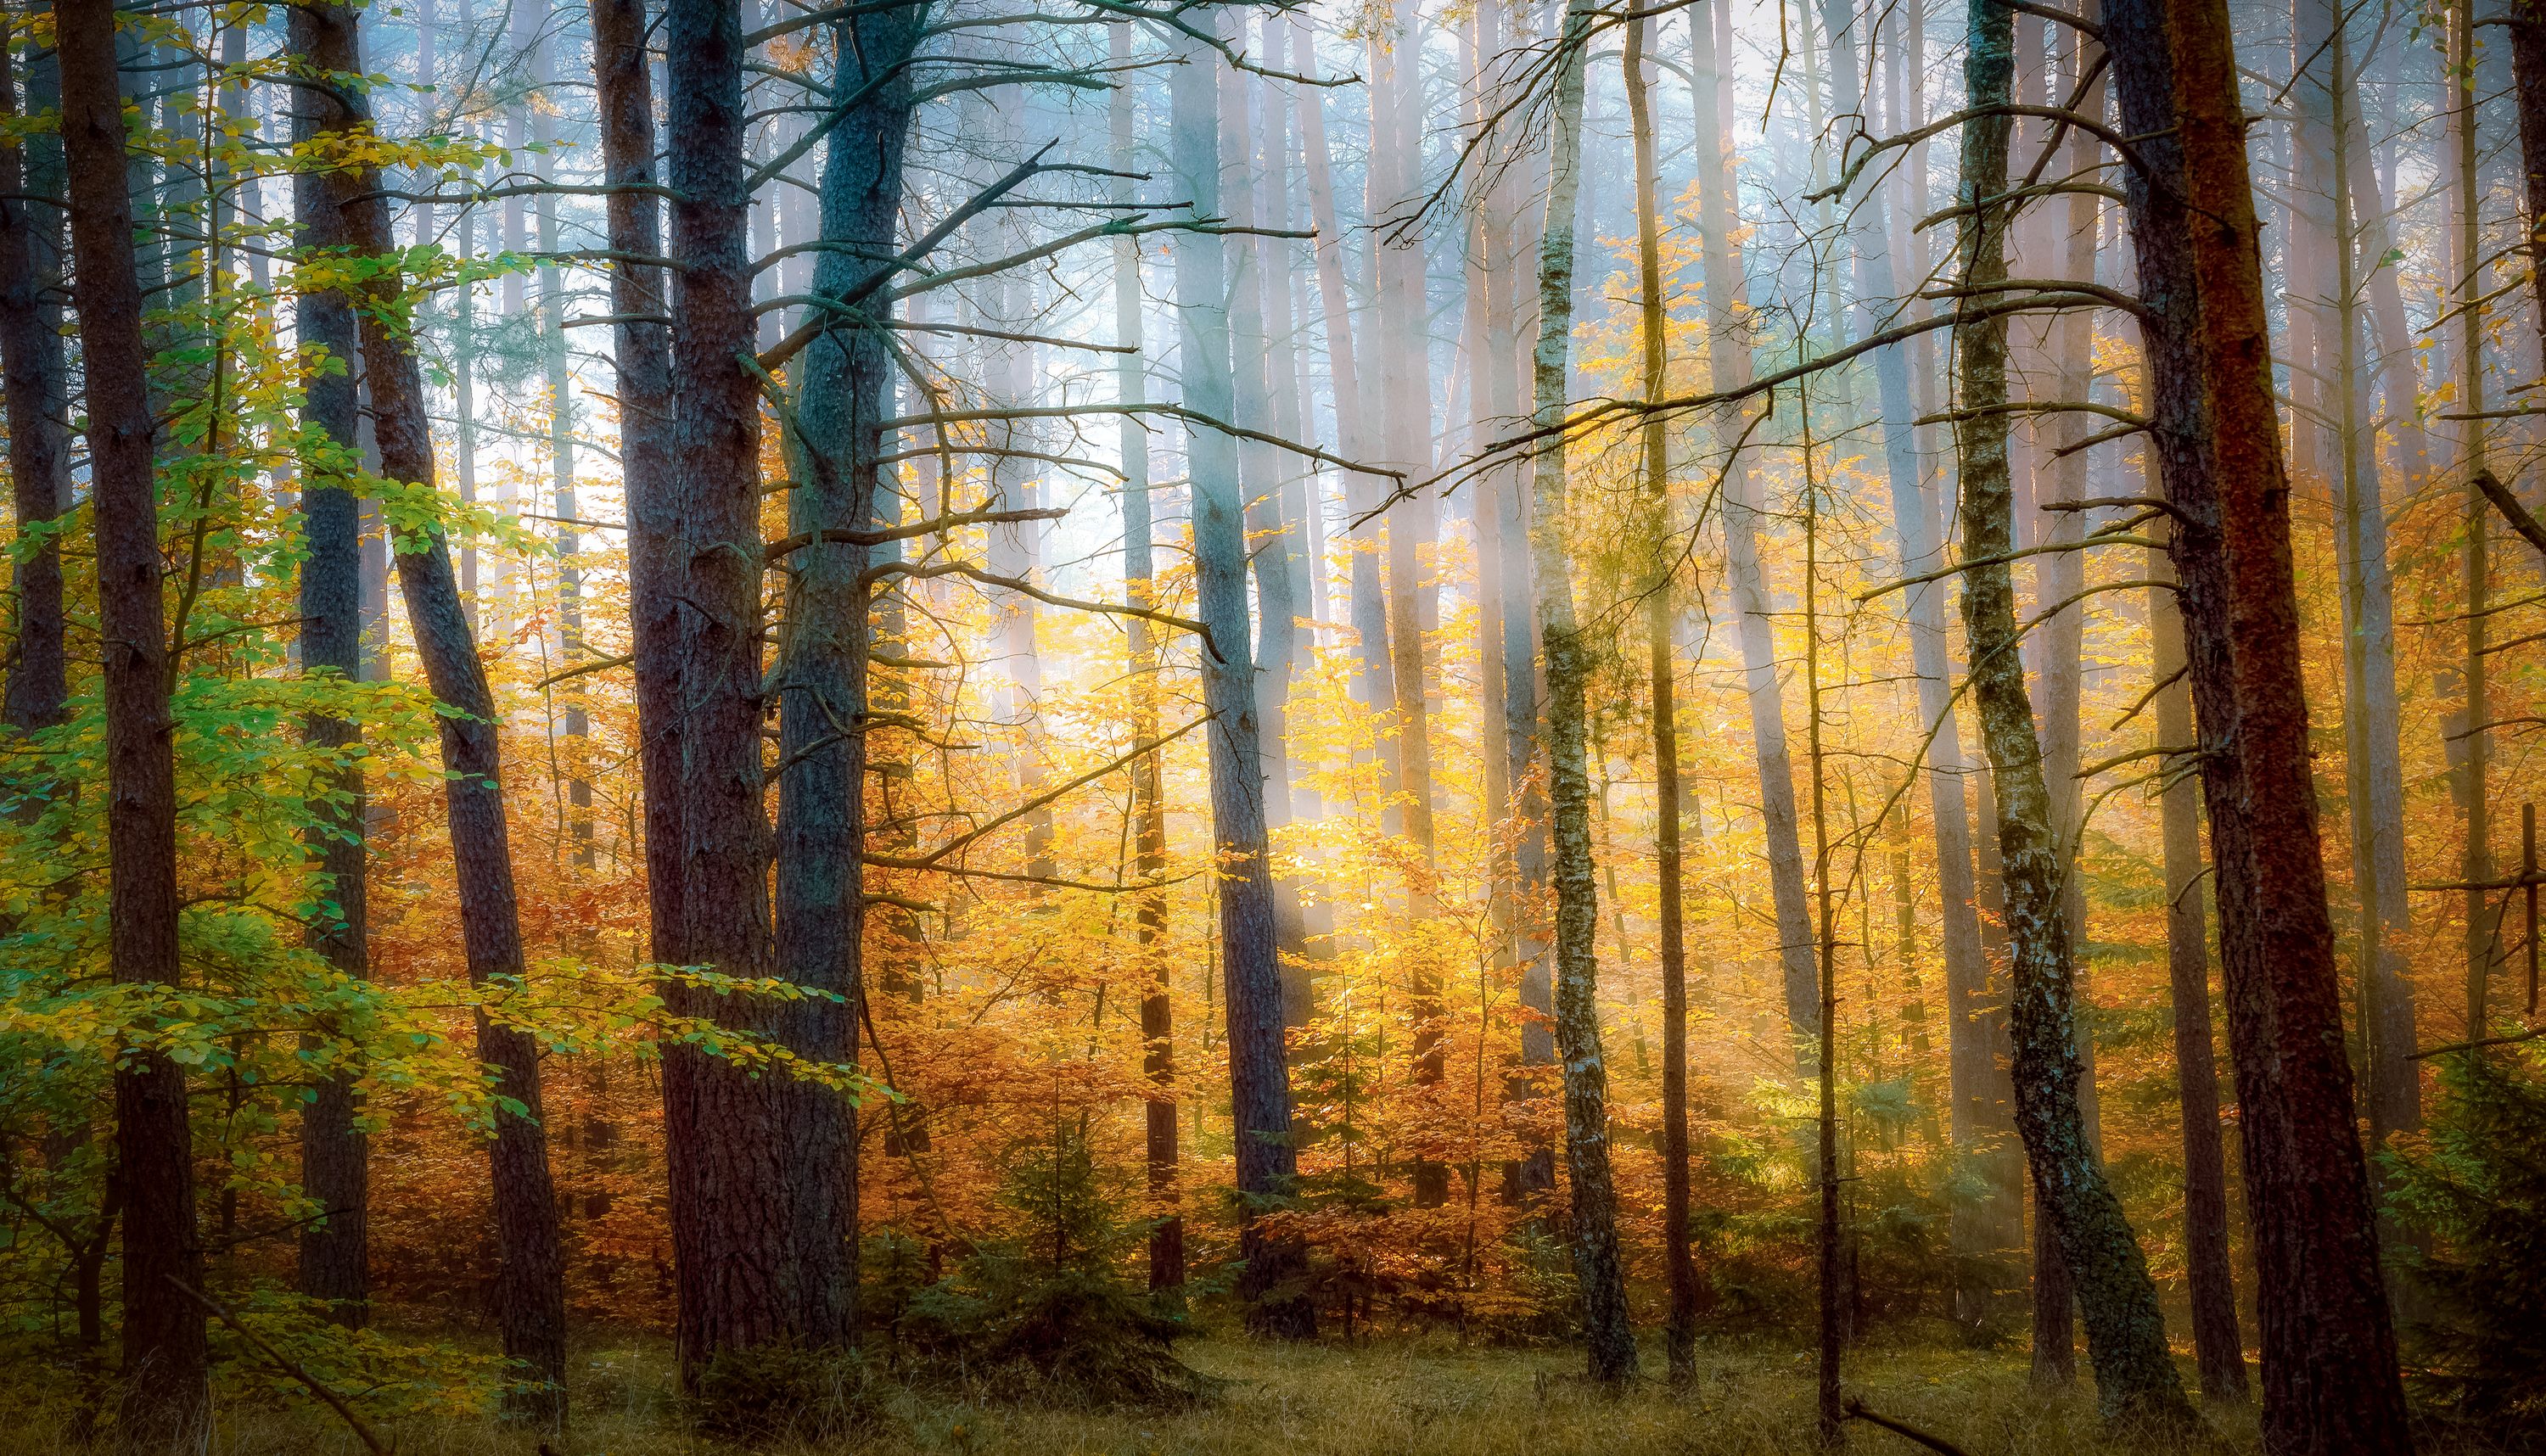 autumn 2021, autumn colors, leaves, forest, trees, forest atmosphere, foggy morning, sunlight, nature, Krzysztof Tollas